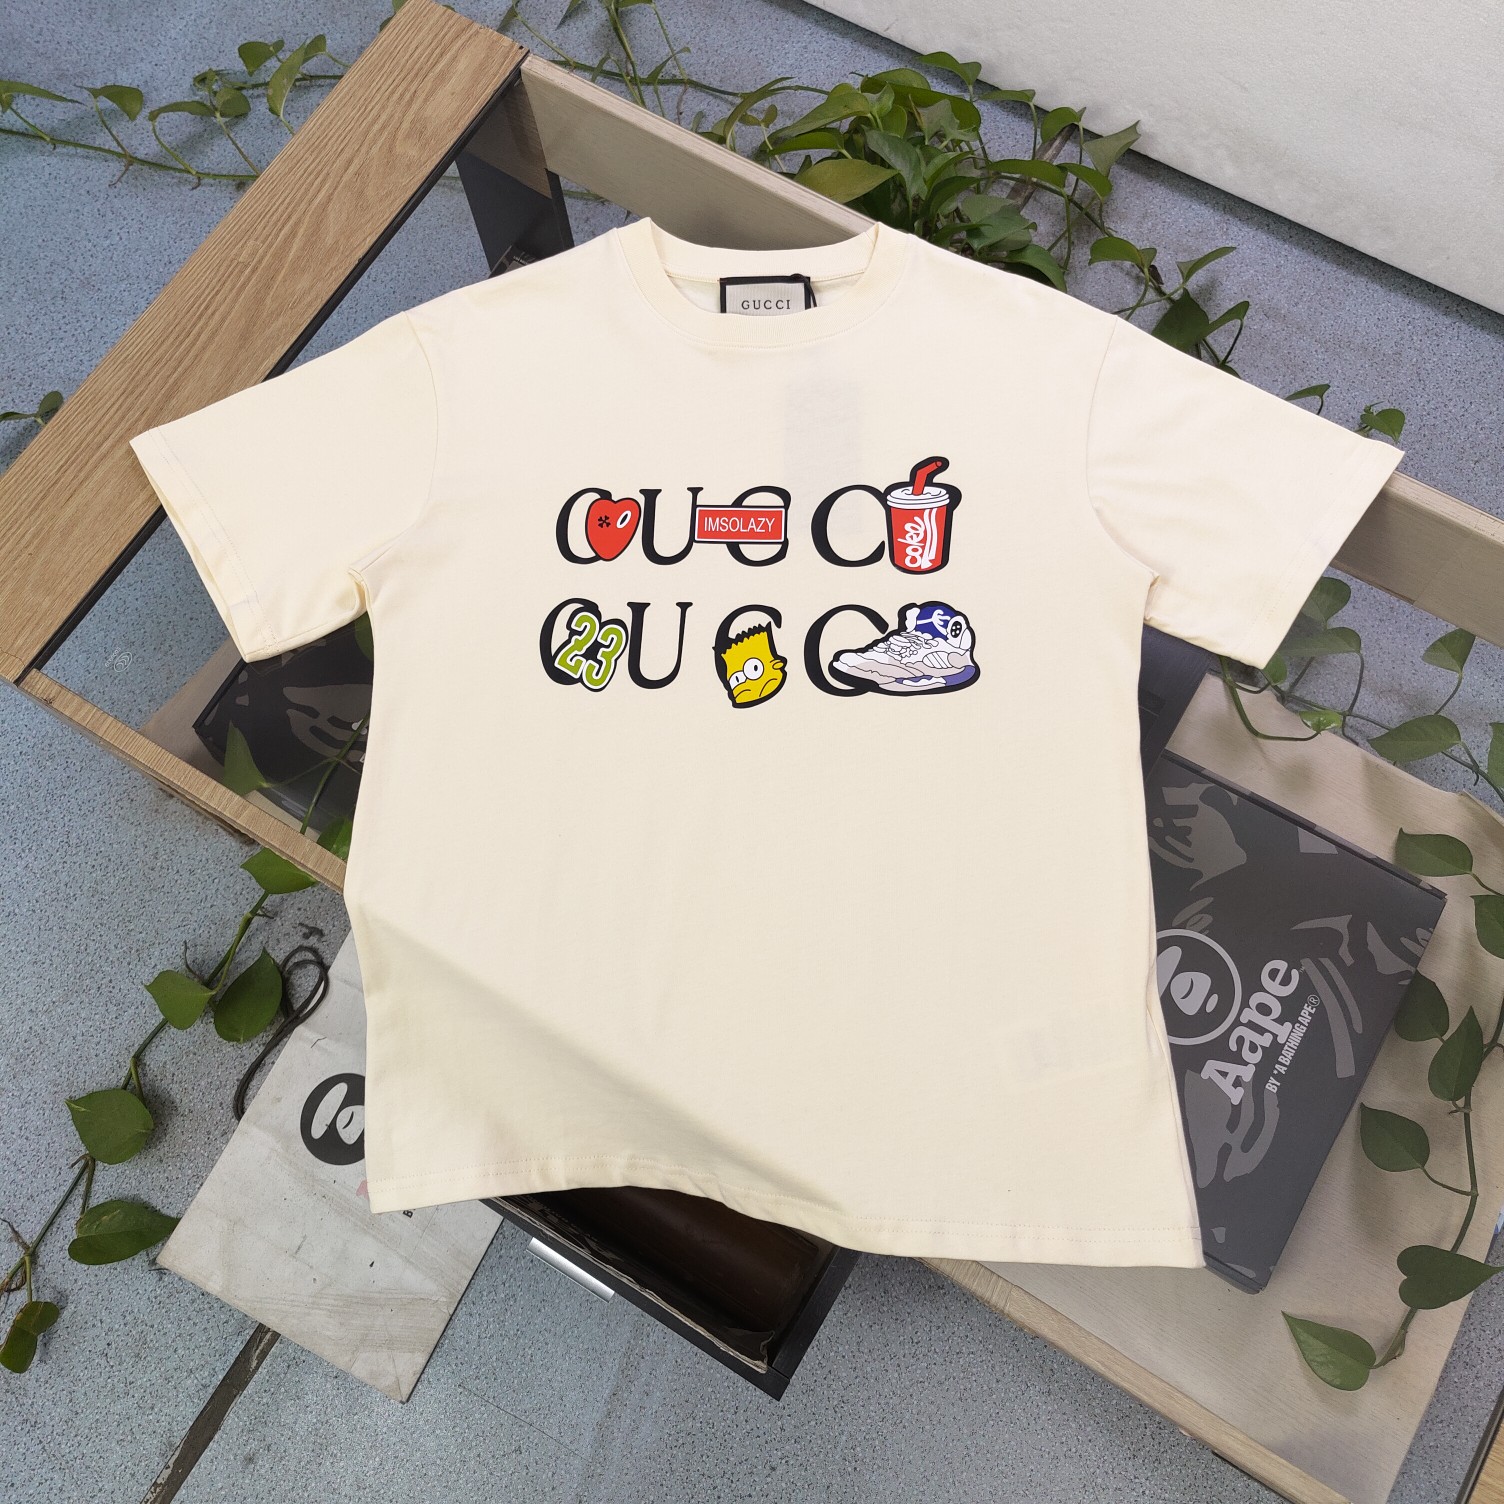 Gucci Clothing T-Shirt Apricot Color Black Printing Unisex Cotton Spring/Summer Collection Short Sleeve XD99088